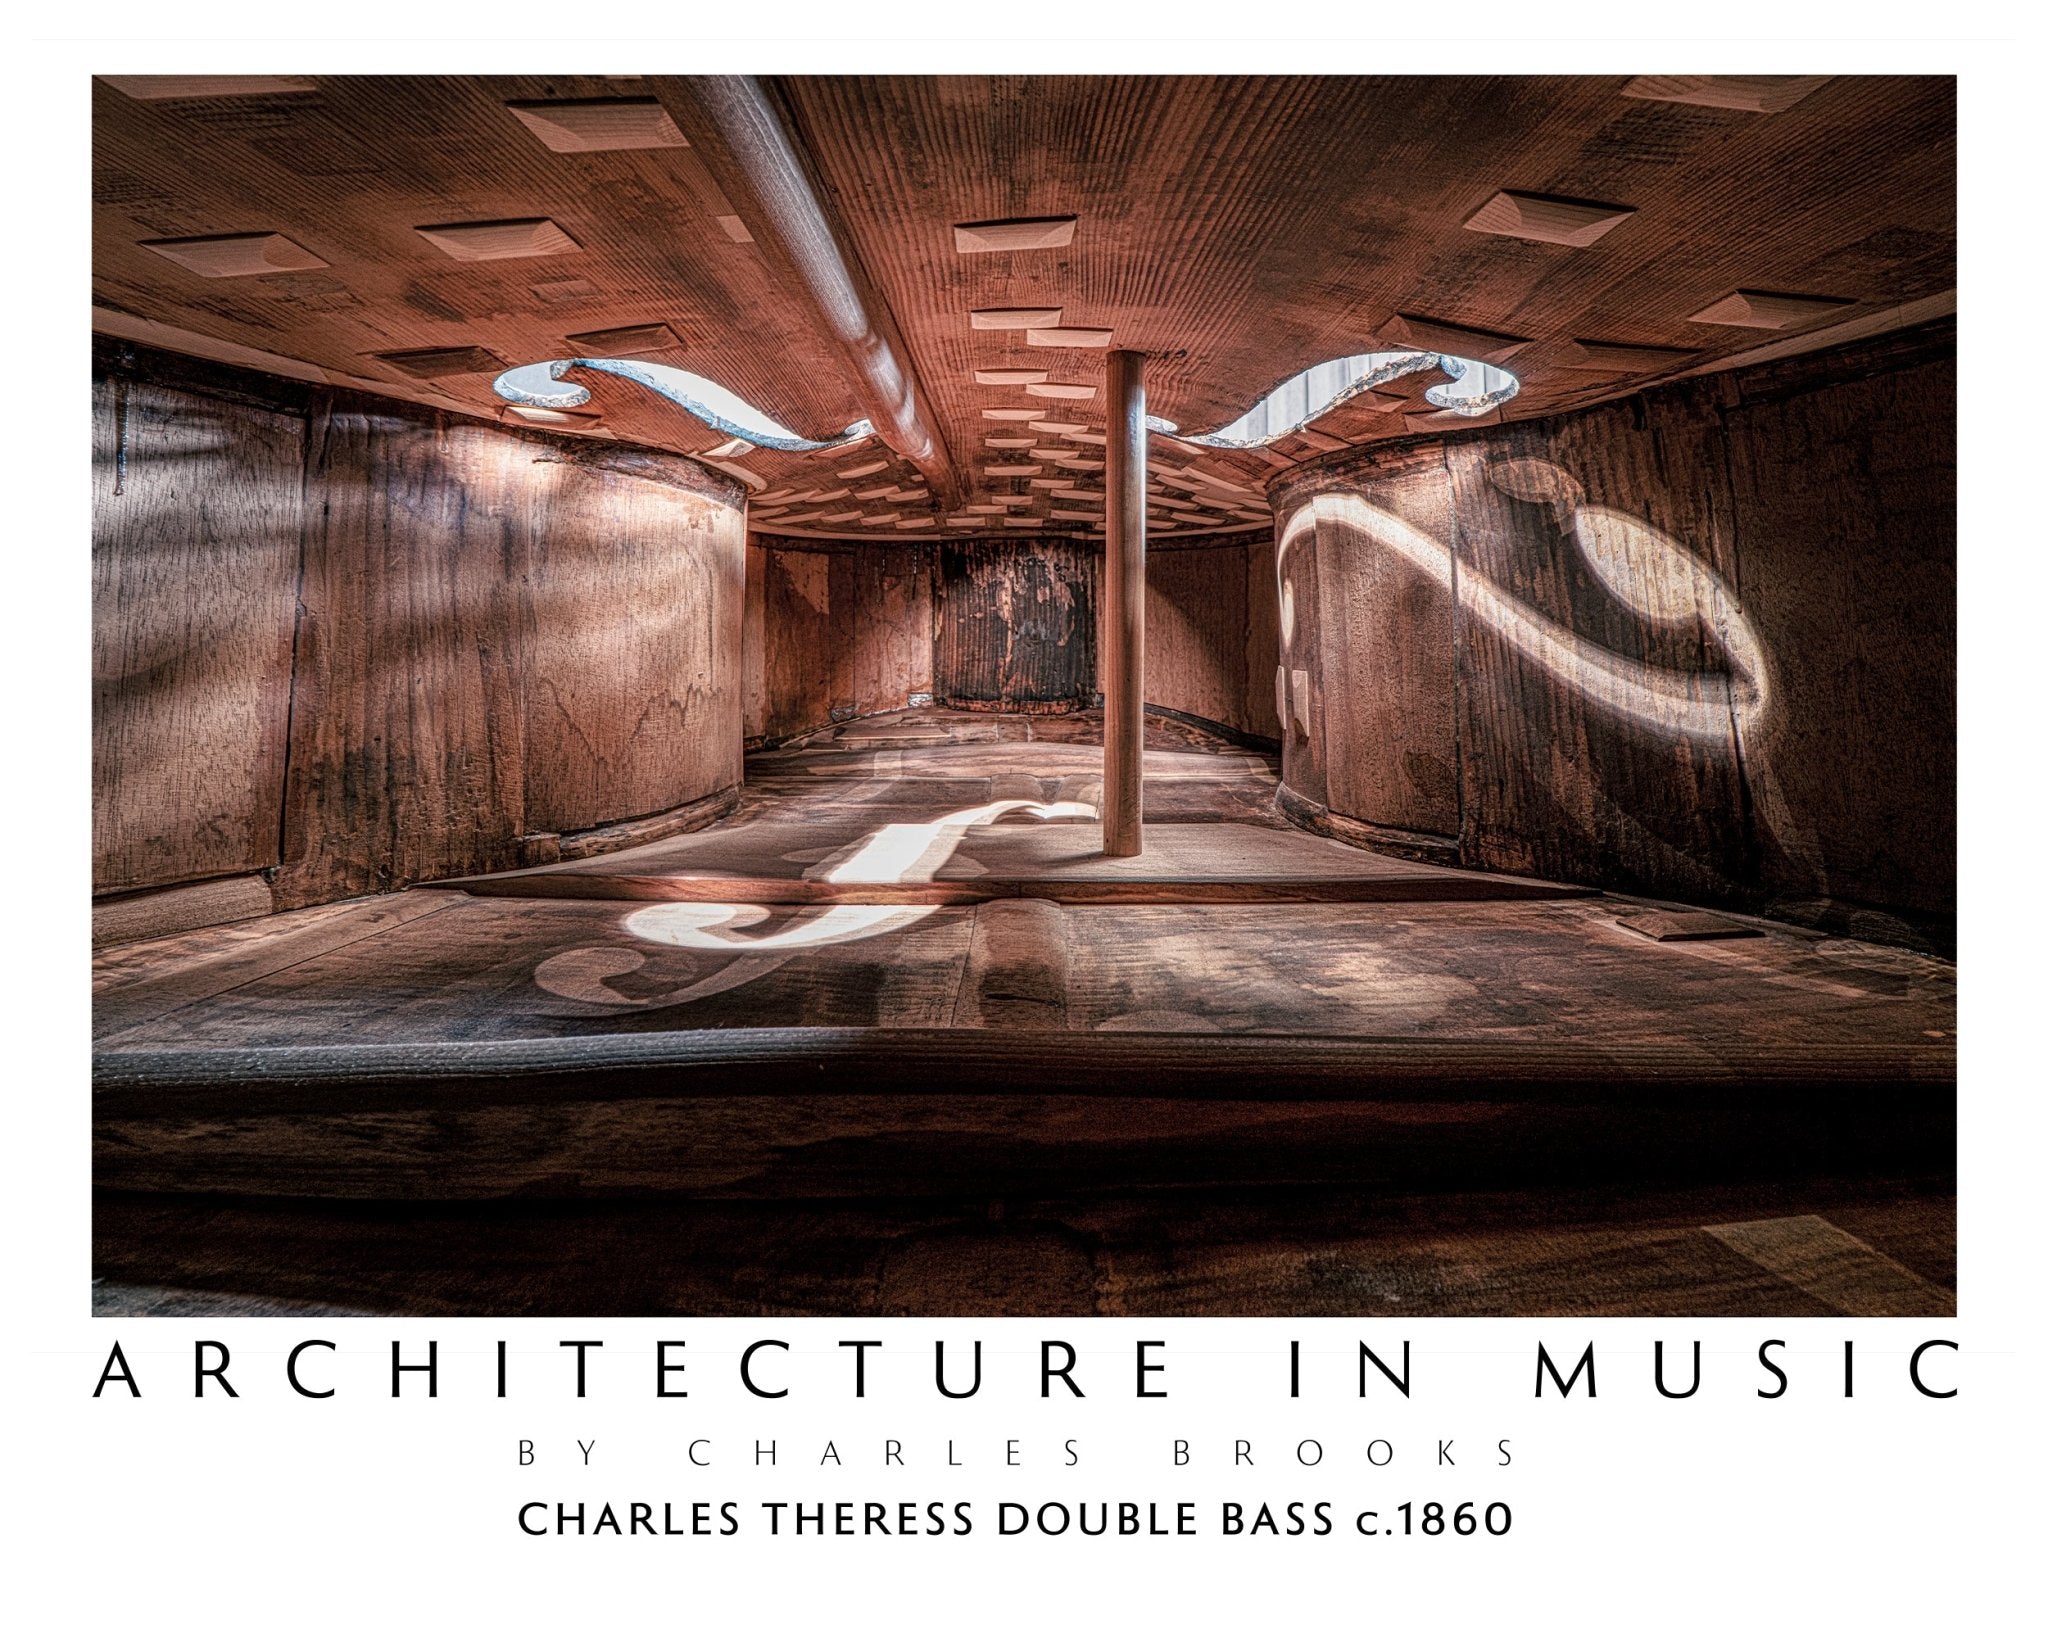 Photo of Charles Theress Double Bass circa 1860. High Quality Poster. - Giclée Poster Print - Architecture In Music